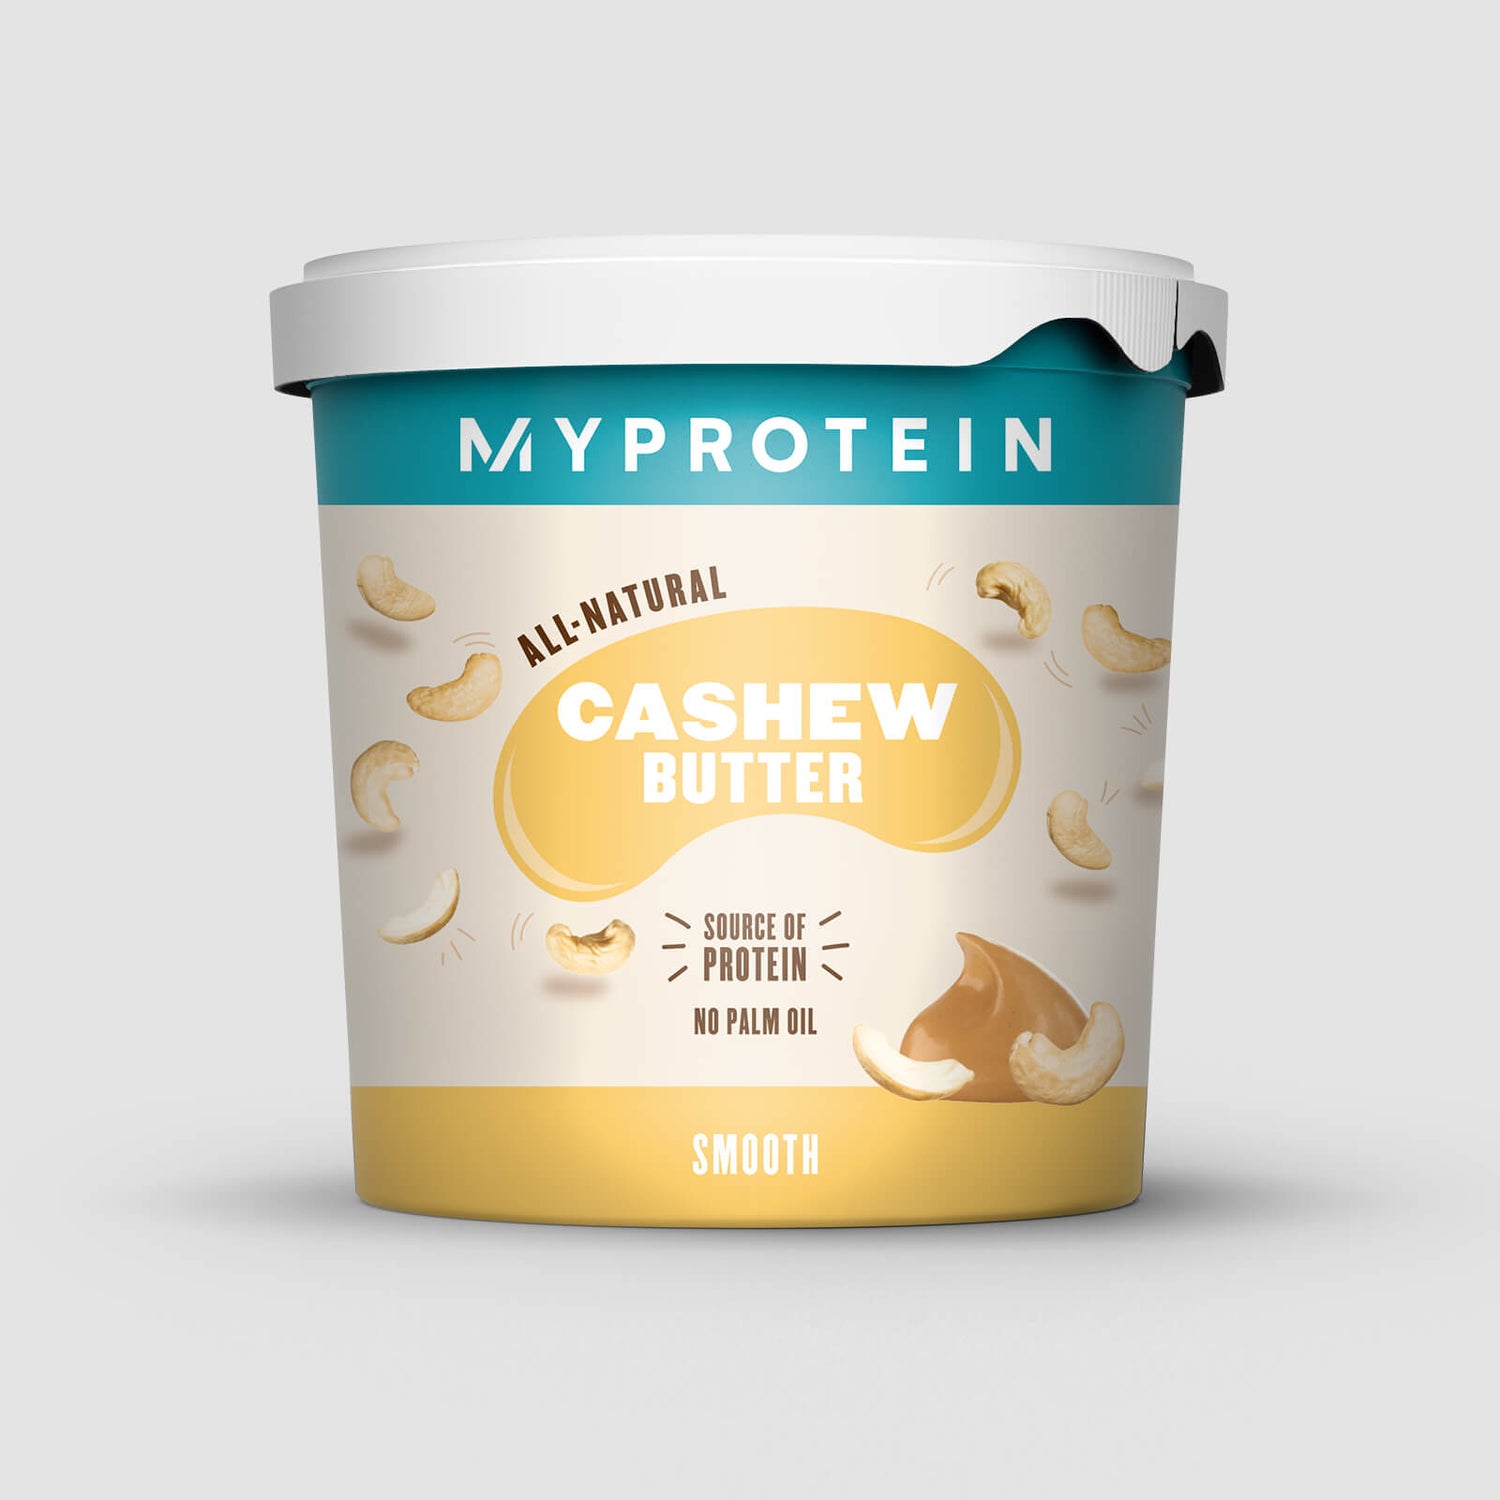 All-Natural Cashew Butter - Smooth